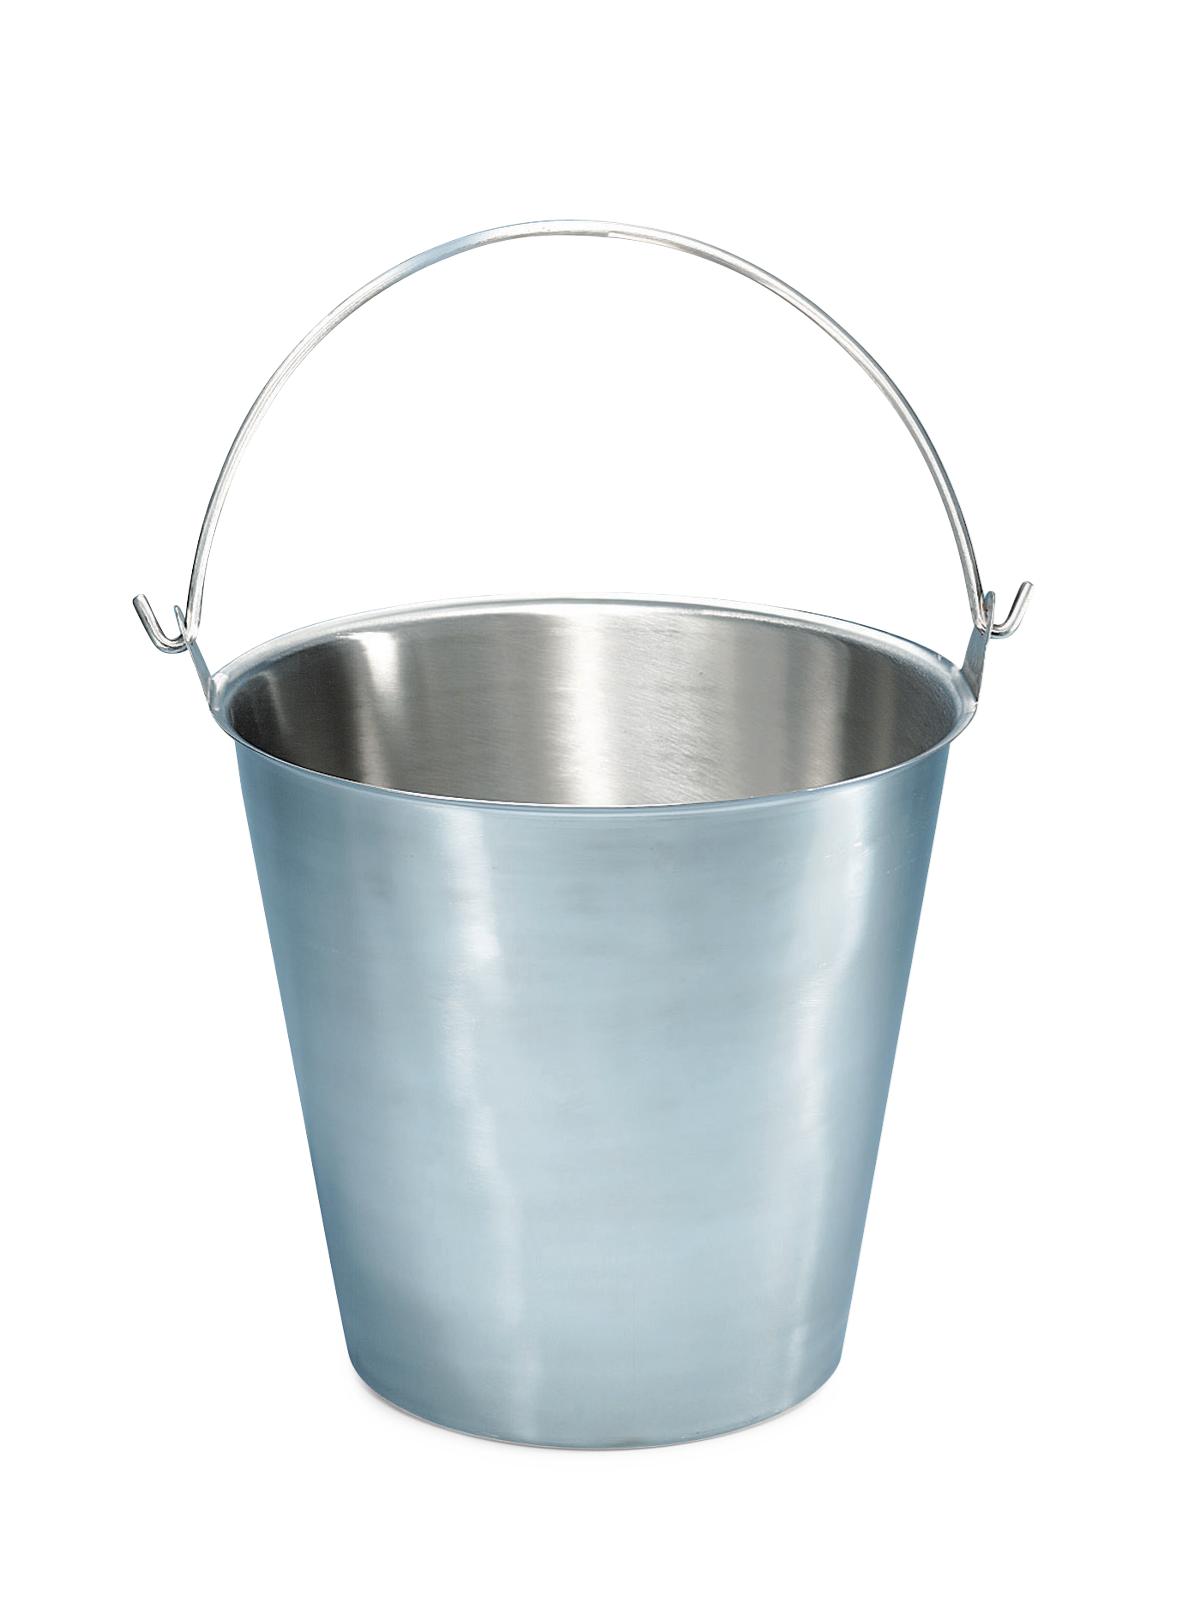  McKesson Kick Bucket with Wheels - Stainless Steel Bucket with  Bumper Frame, 13 qt, 1 Count : Health & Household